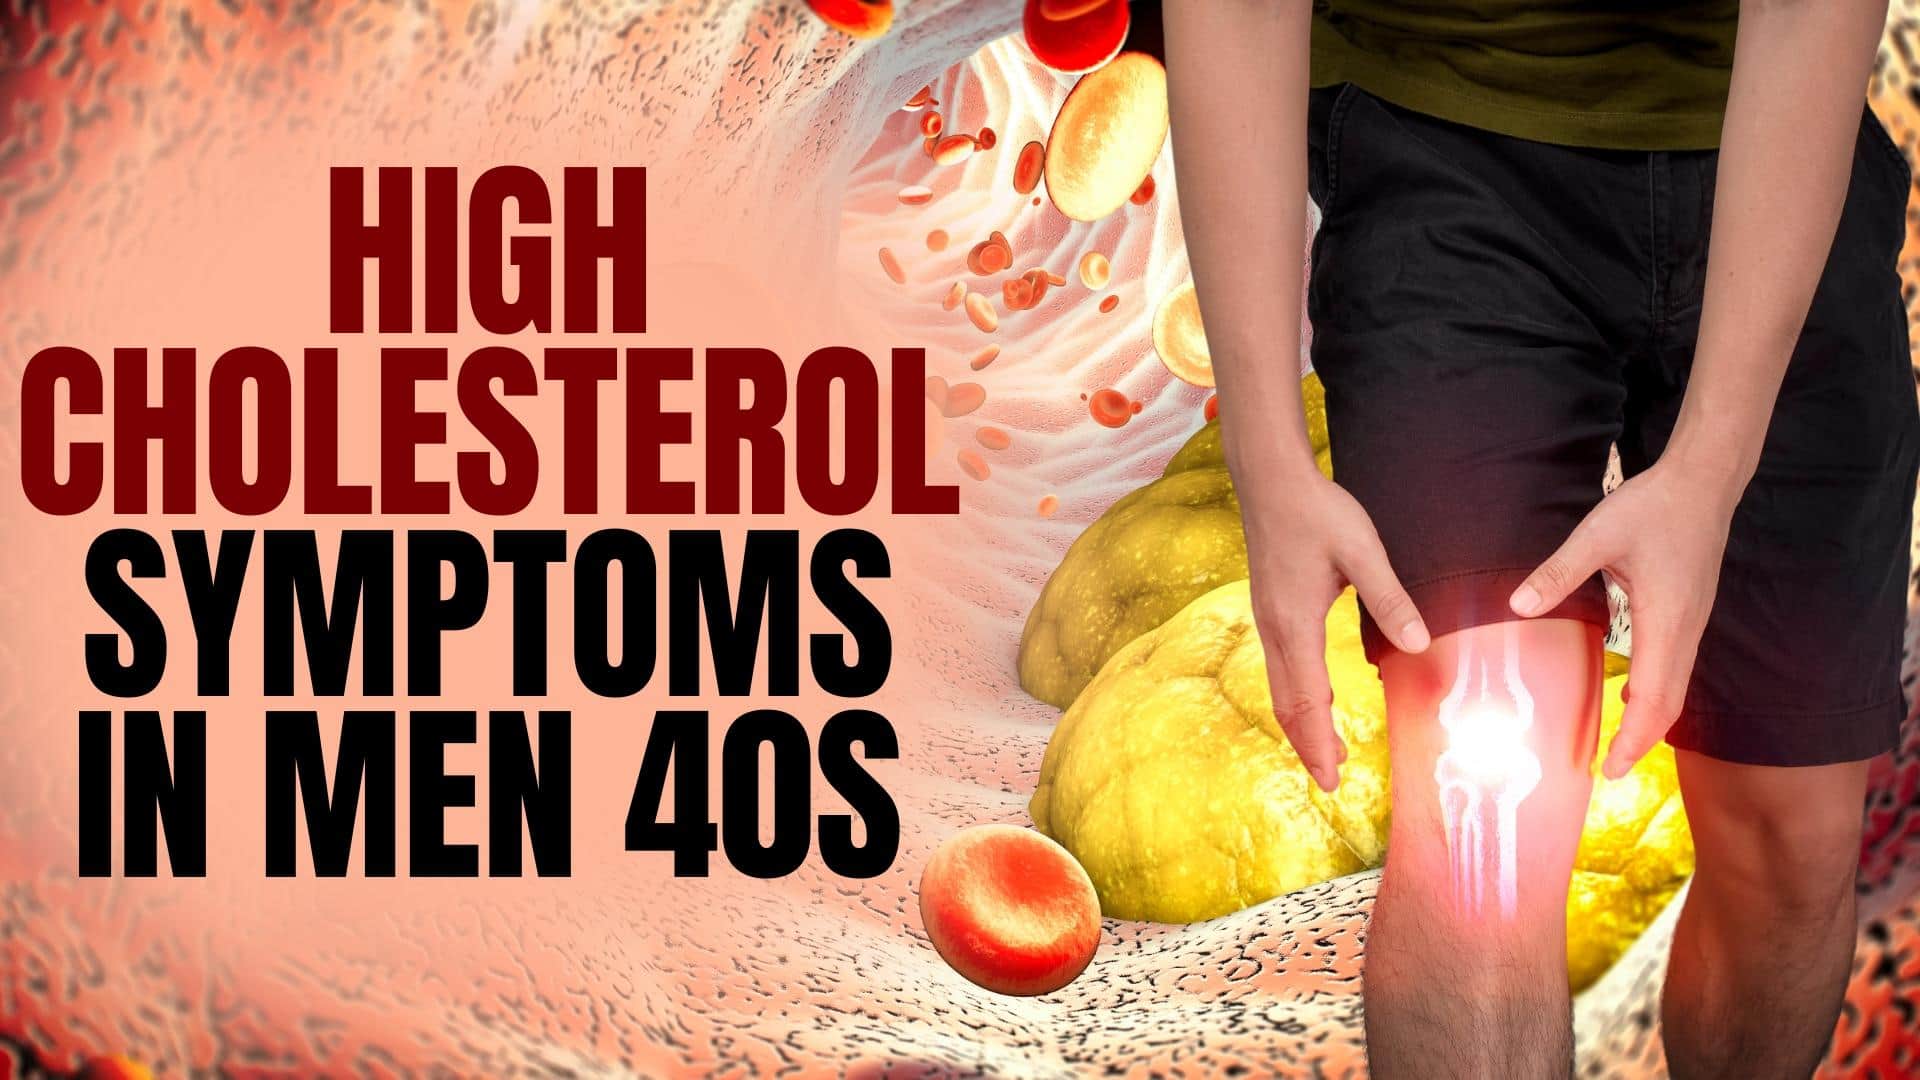 High Cholesterol Symptoms In Men 40s: 7 Signs of High LDL Cholesterol In Legs and Feet At Night